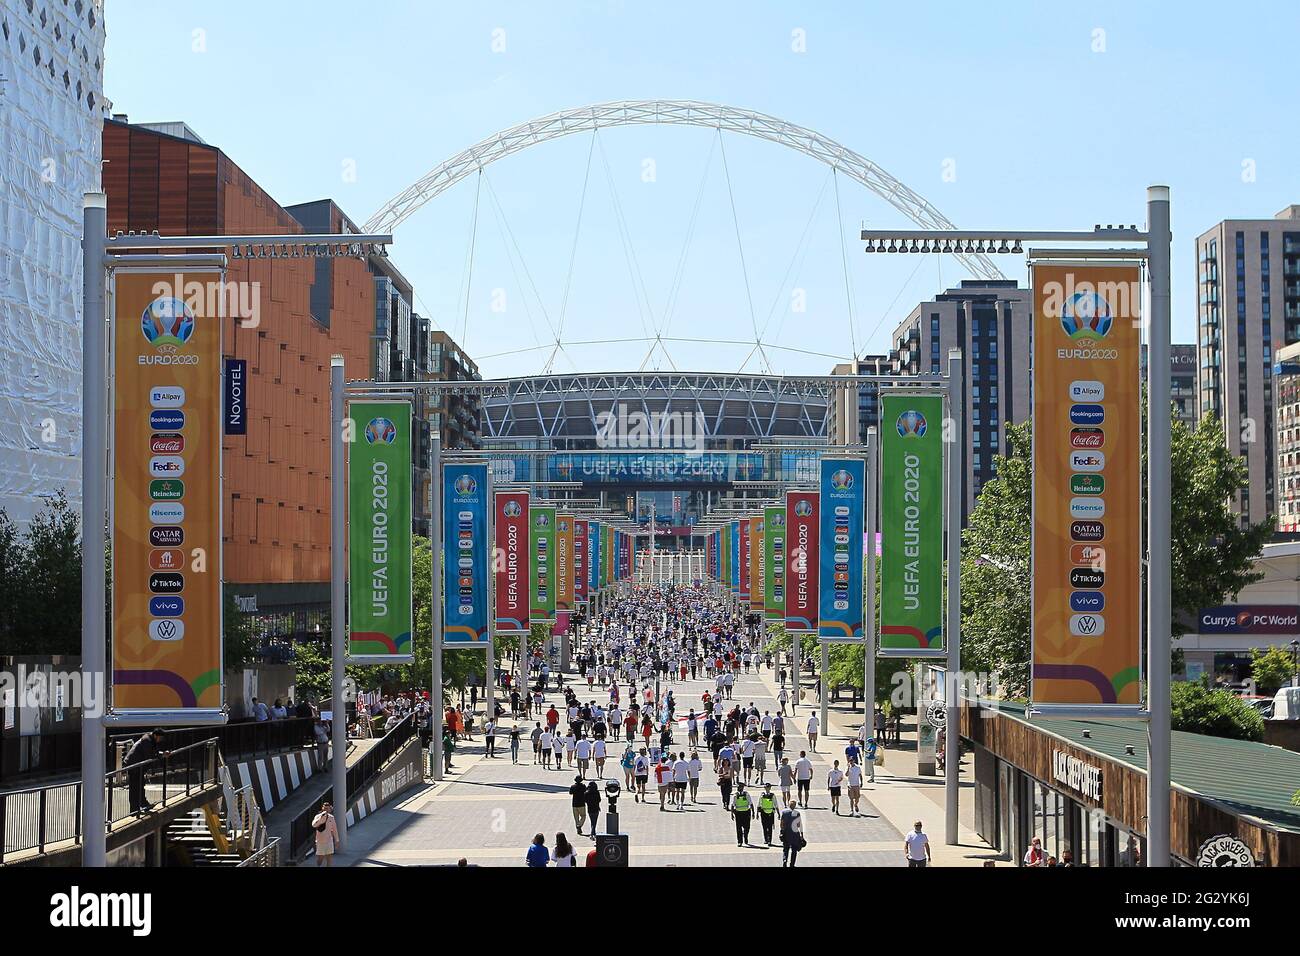 London, UK. 13th June, 2021. General view of the stadium and fans walking down Wembley Way prior to kick off. Scenes ahead off the UEFA Euro 2020 tournament match, England v Croatia, Wembley Stadium, London on Sunday 13th June 2021. this image may only be used for Editorial purposes. pic by Steffan Bowen/Andrew Orchard sports photography/Alamy Live news Credit: Andrew Orchard sports photography/Alamy Live News Stock Photo